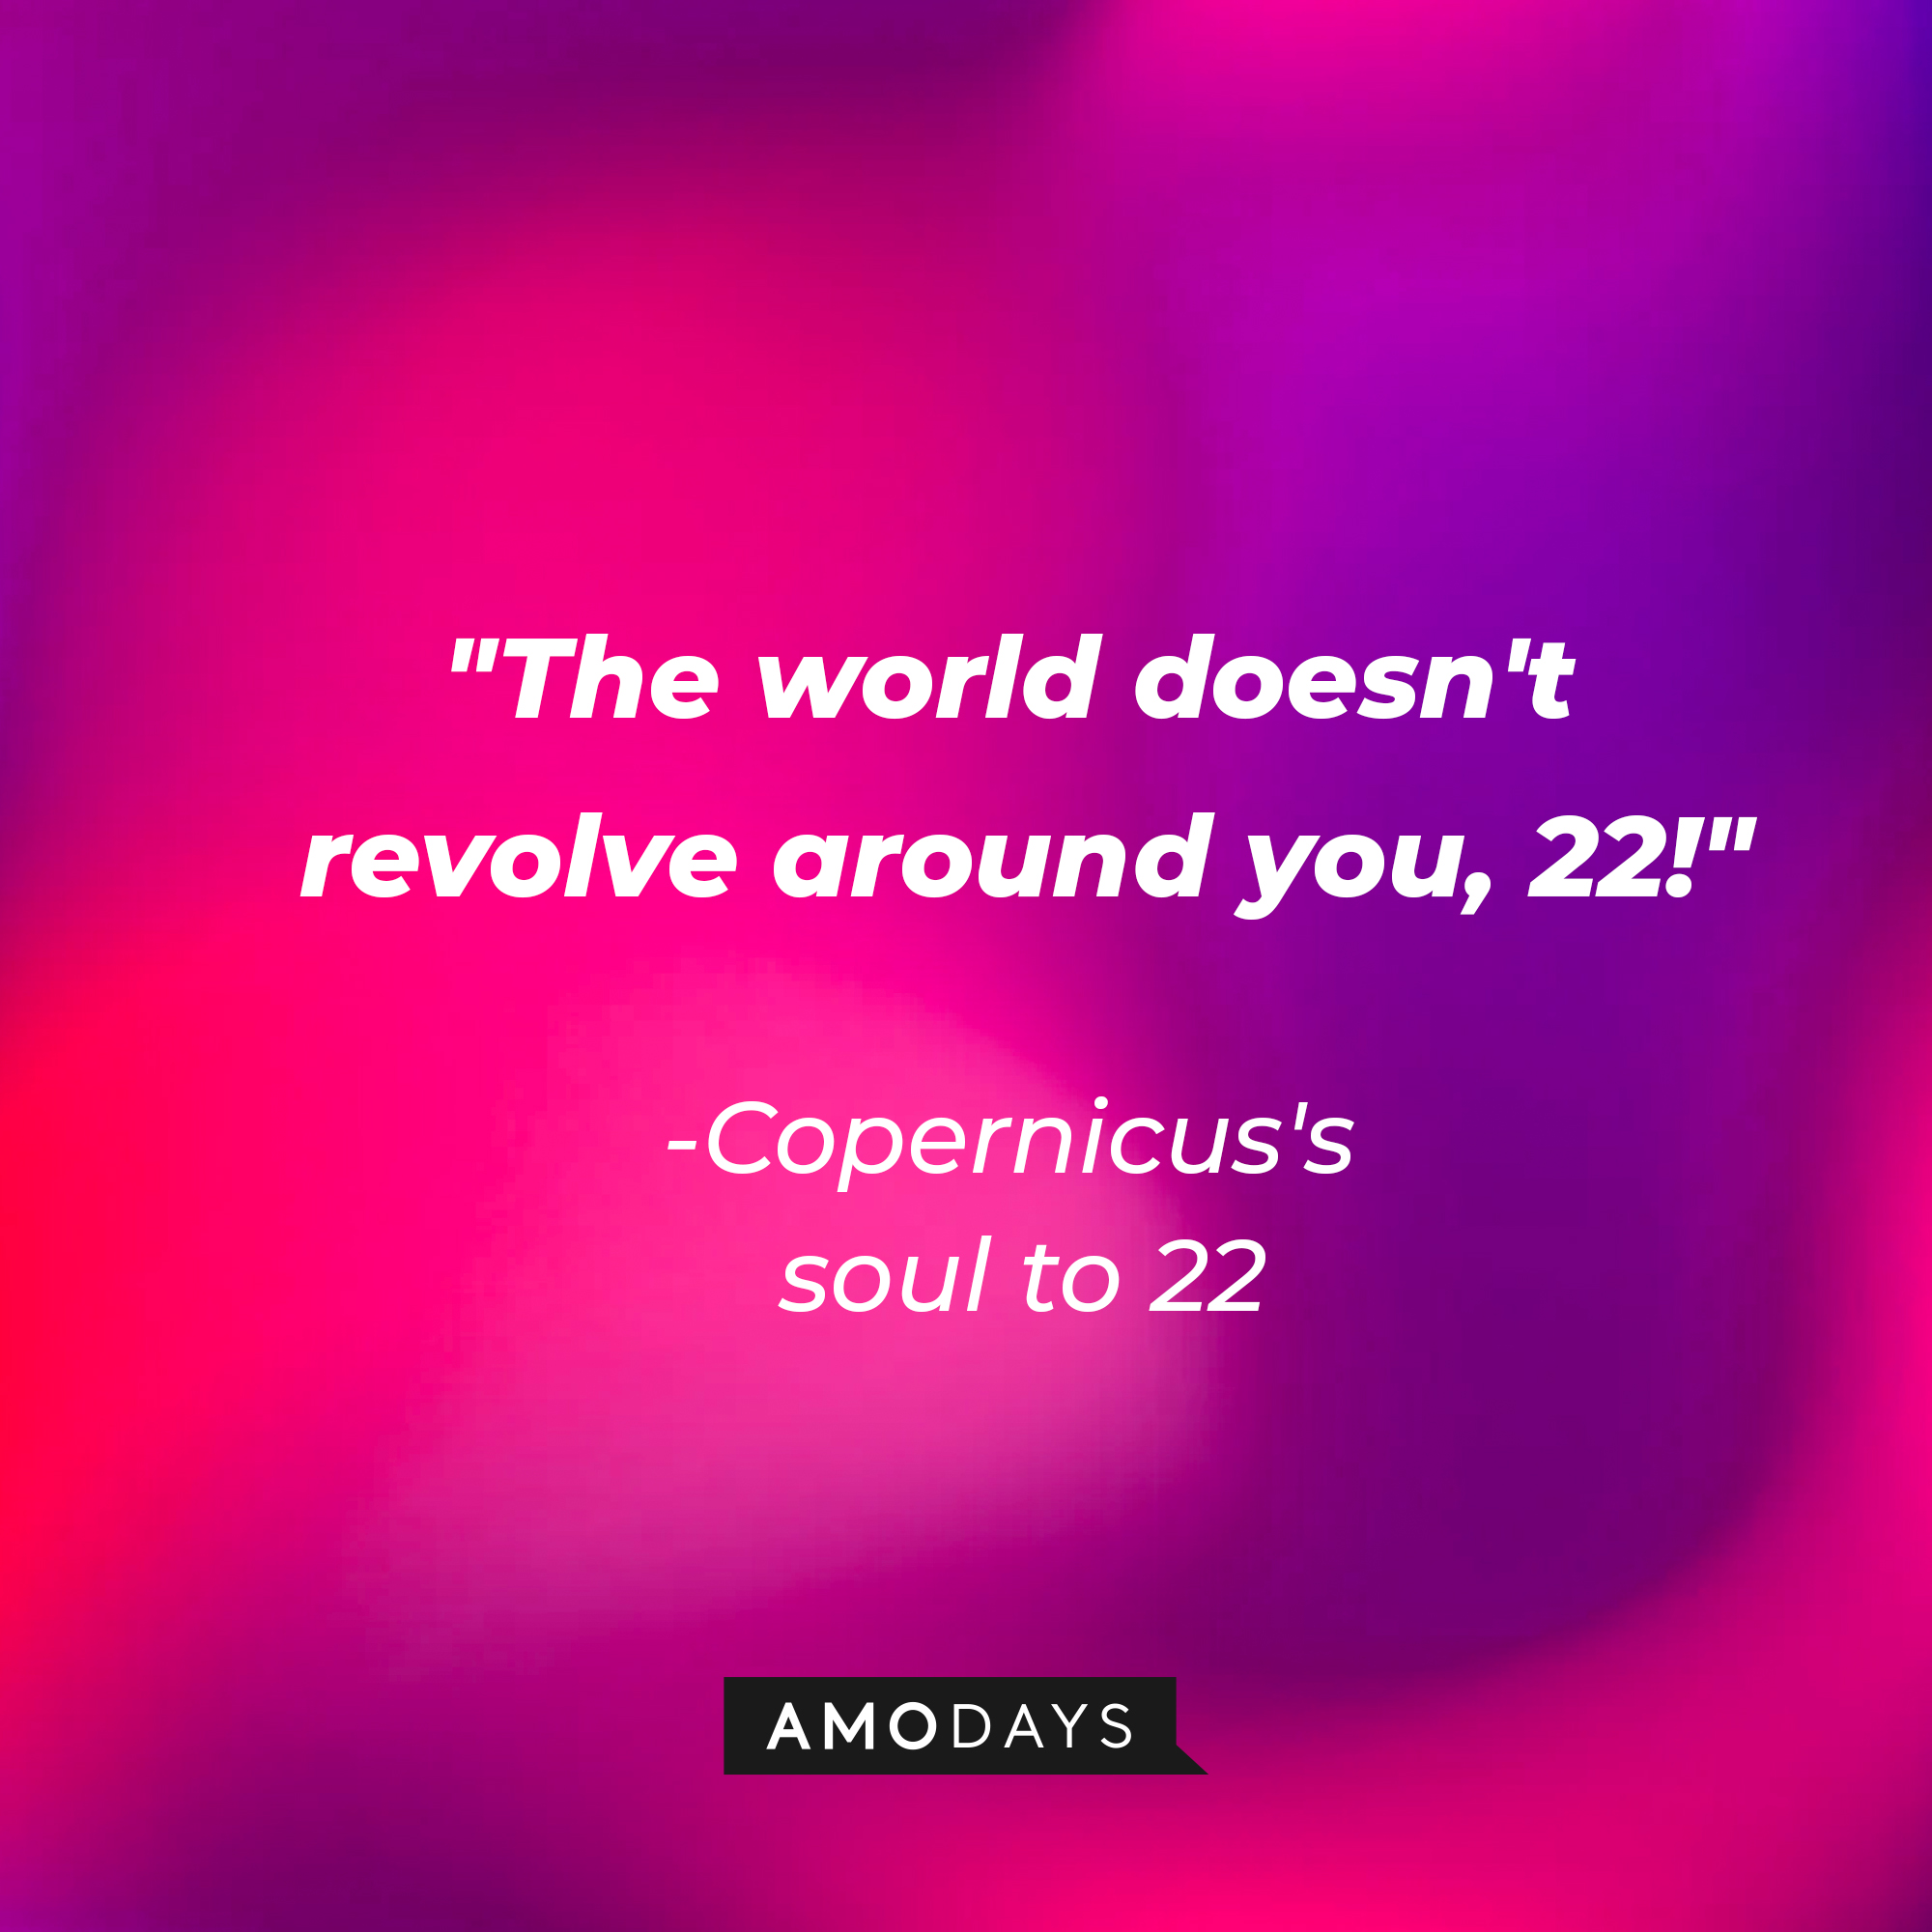 A quote of Copernicus's soul to 22 : "The world doesn't revolve around you, 22!" | Source: youtube.com/pixar